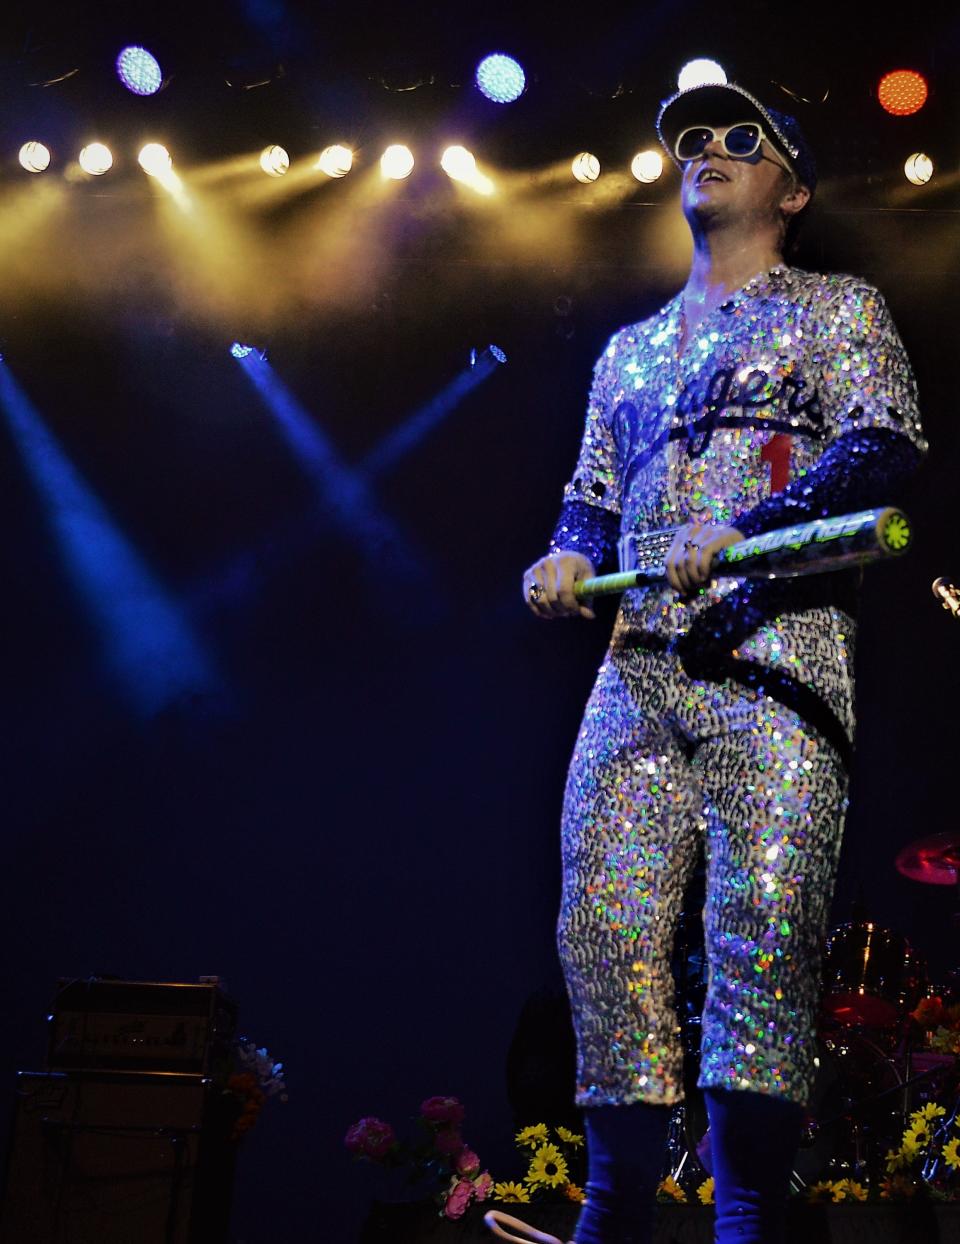 Anderson as Elton John in the sequined costume from his 1975 concert at Dodger Stadium.